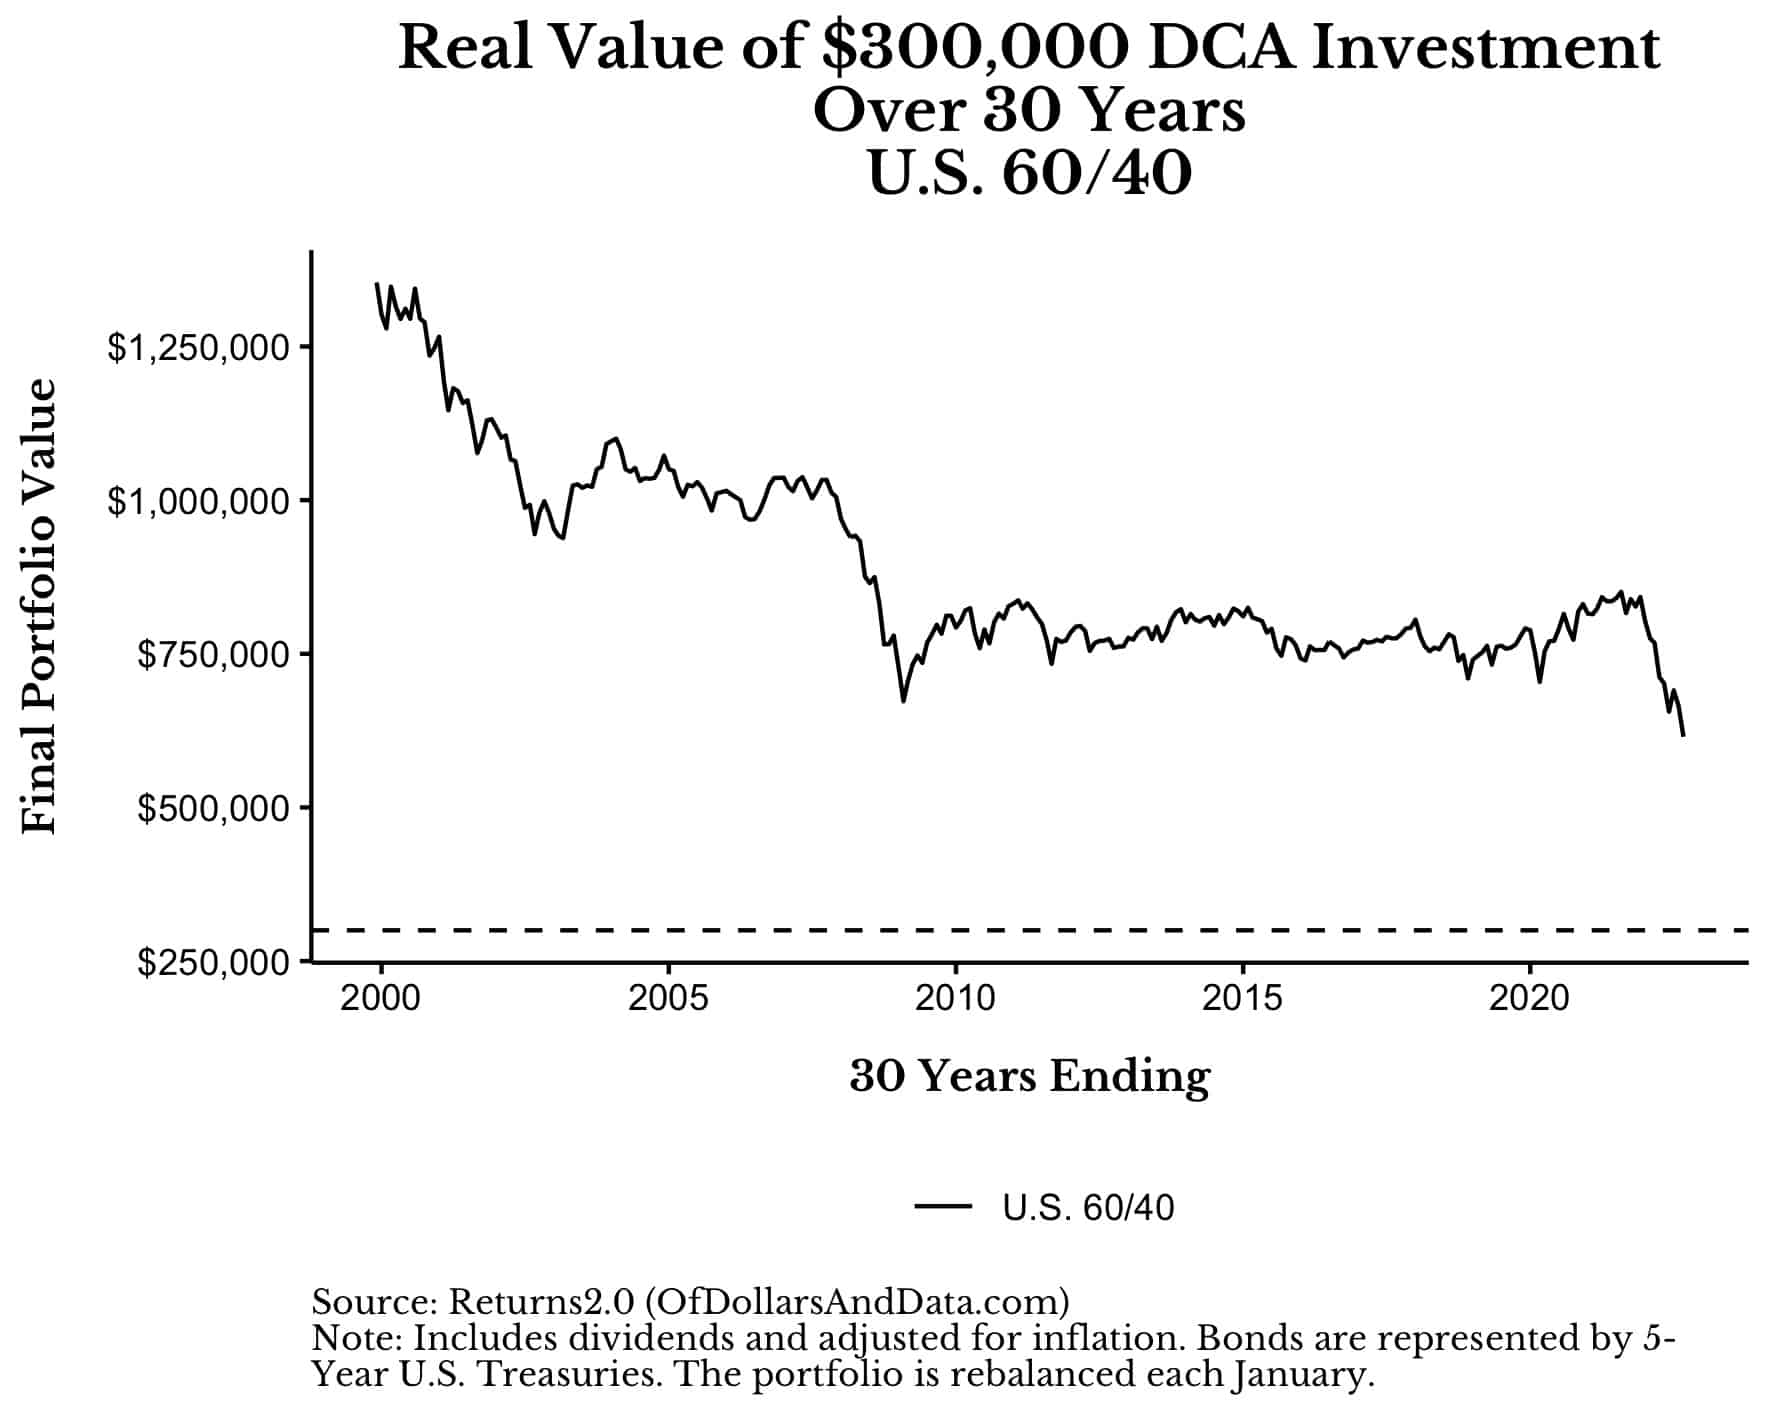 Real value of $300,000 DCA investing over 30 years into 60/40 portfolio